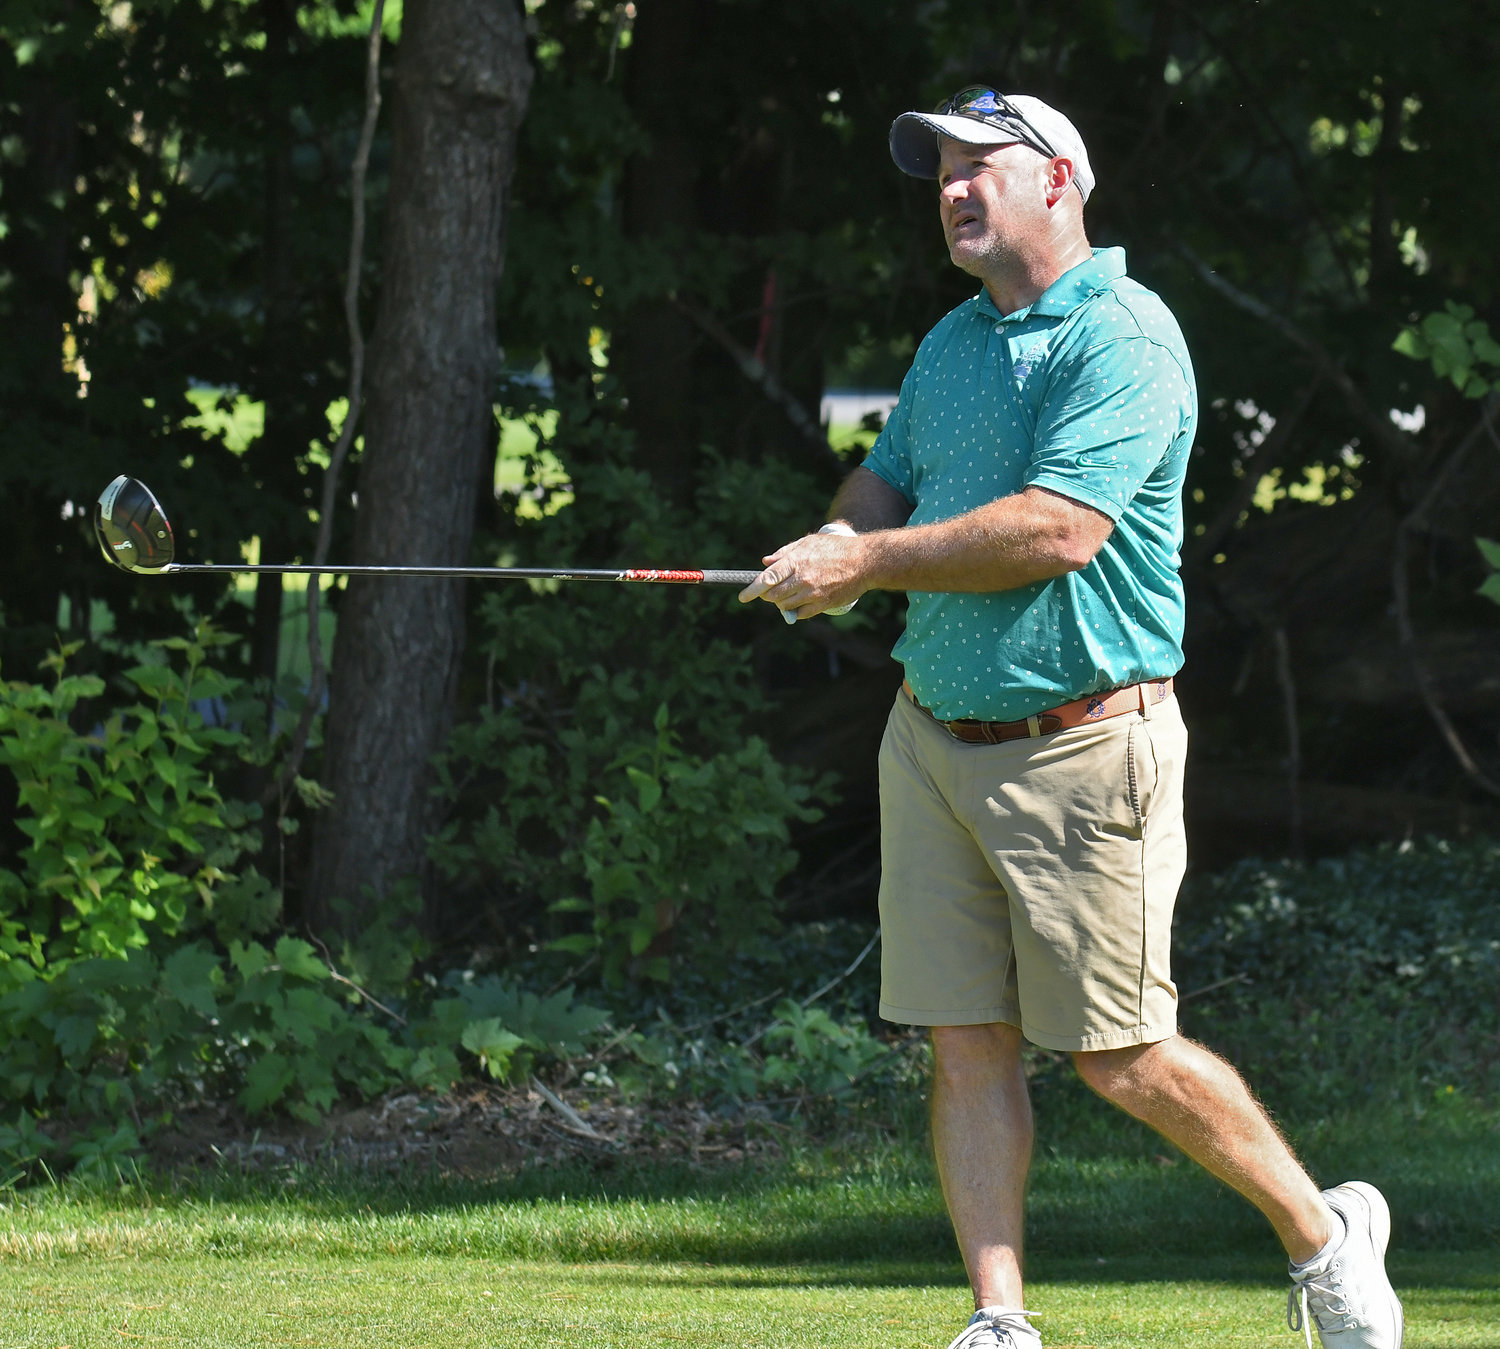 Chris McMahon hits a drive on the par 4 16th hole on Sunday afternoon at McConnellsville Country Club during the final round of the Rome City Men's Amateur Golf Championship. McMahon finished fourth with a two-day score of 157.